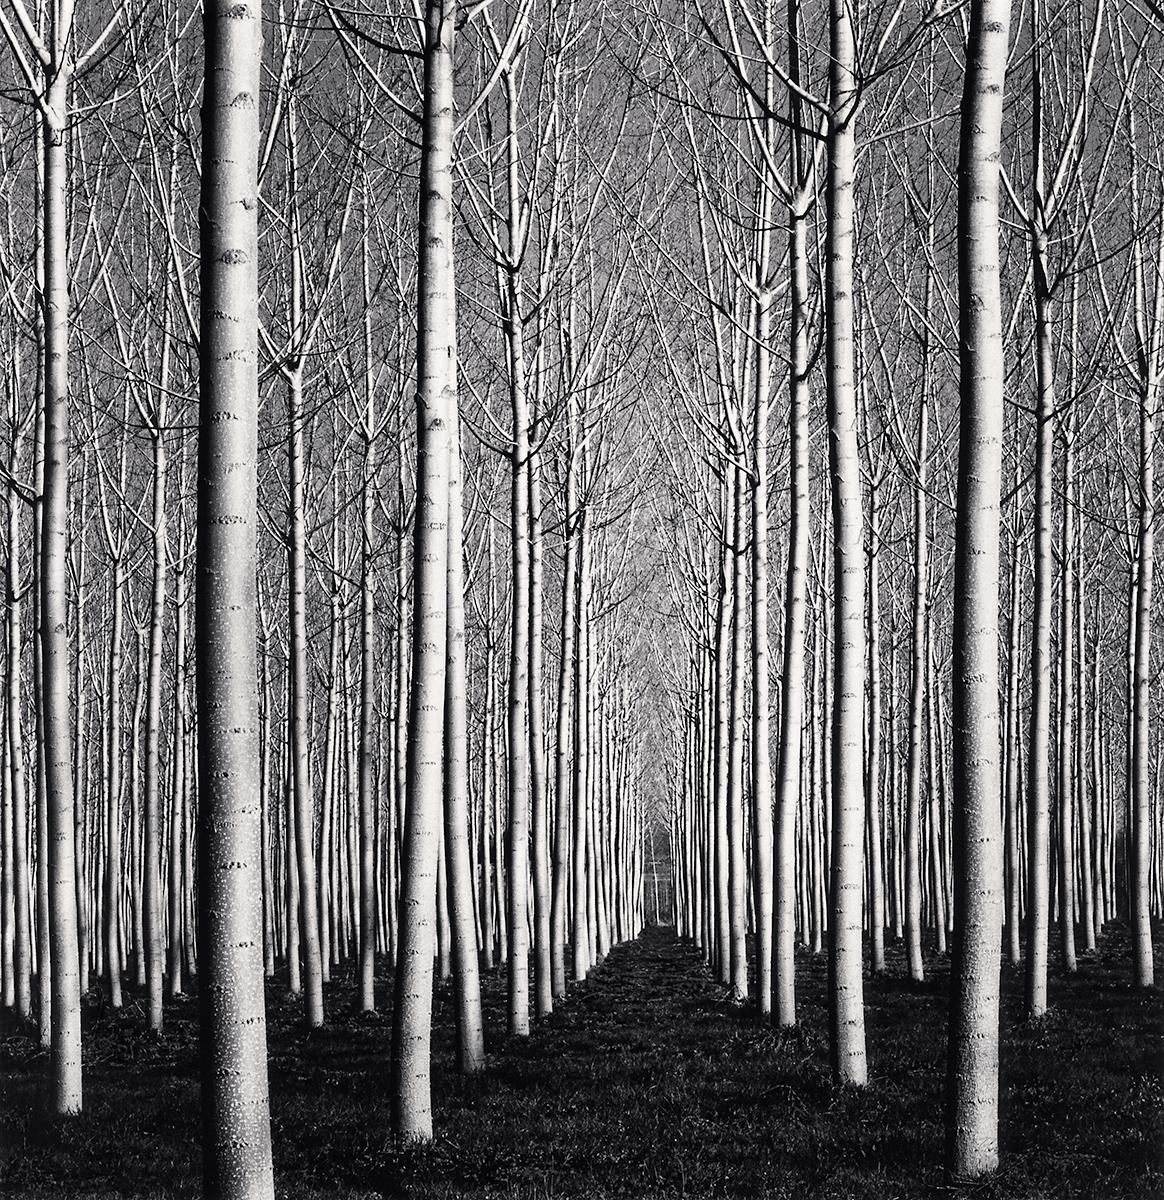 Spring Poplar Trees by Michael Kenna depicts a forest scene. The barren white trees stand tall in rows, seemingly multiplying as they get further in the distance. 

Spring Poplar Trees by Michael Kenna is listed as an 8 x 8 inch gelatin silver